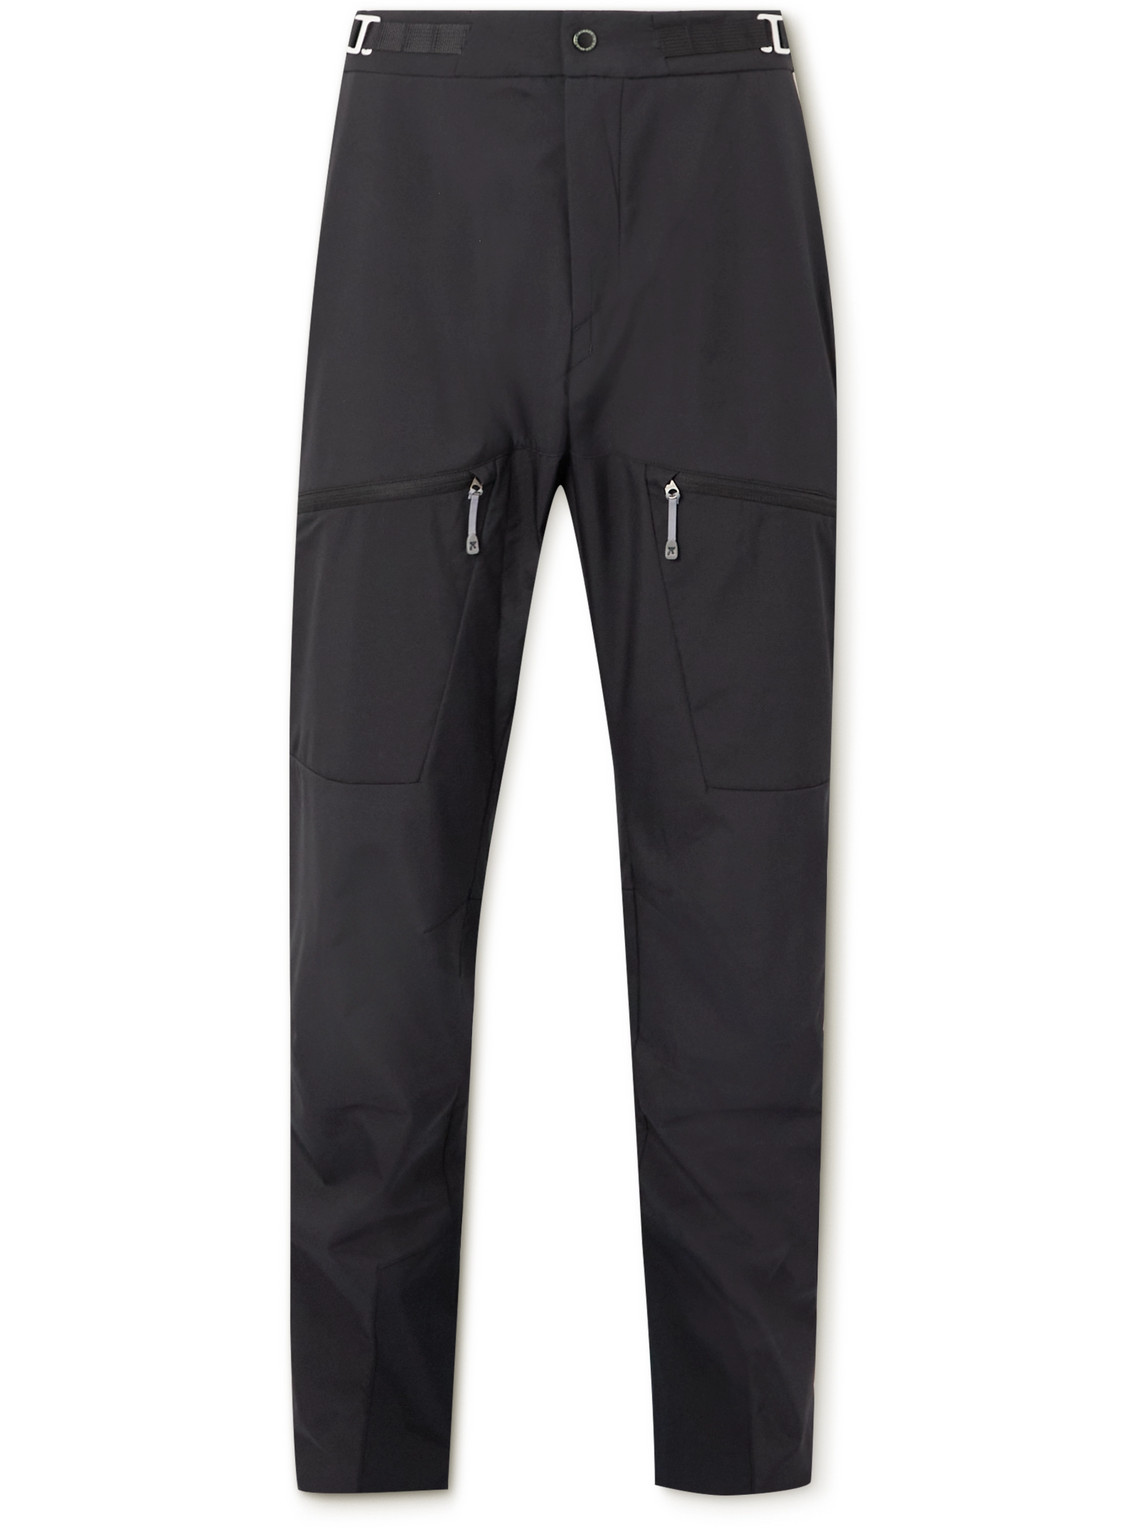 Houdini Pace Slim-Fit Recycled Ski Pants